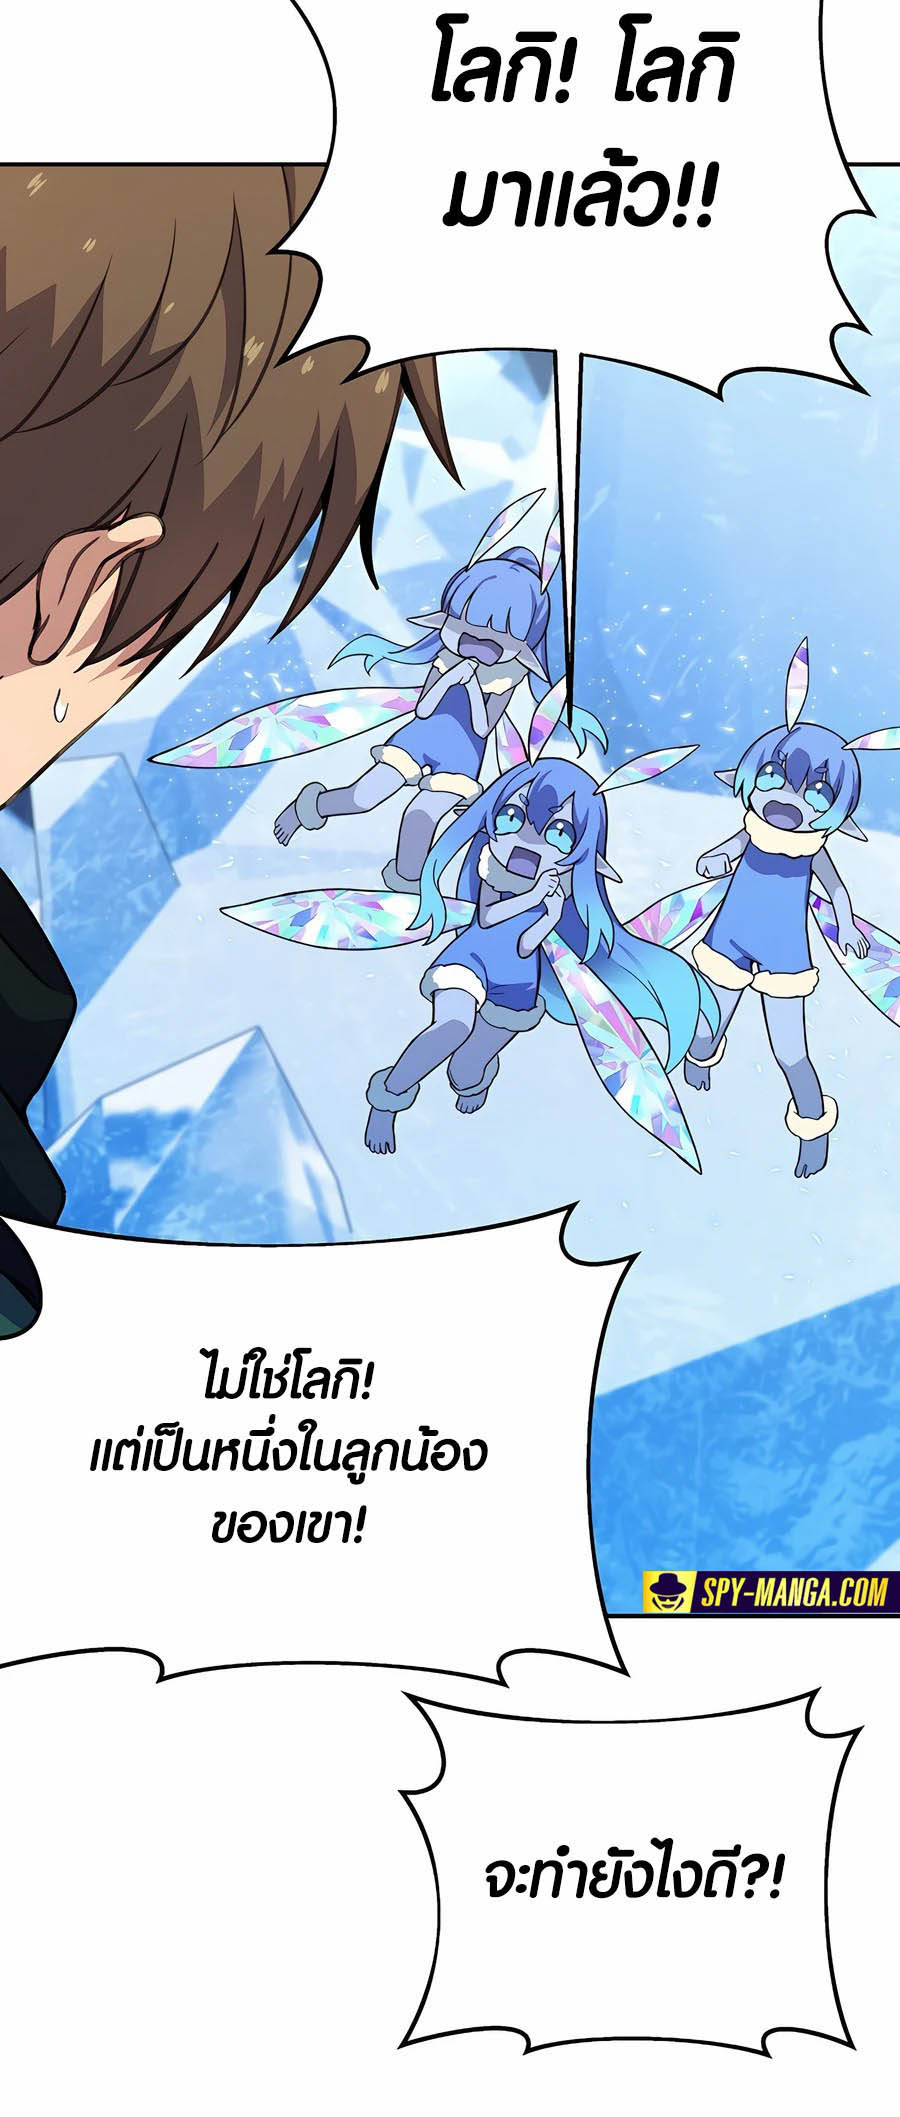 à¸­à¹ˆà¸²à¸™à¸¡à¸±à¸™à¸®à¸§à¸² à¹€à¸£à¸·à¹ˆà¸­à¸‡ The Part Time Land of the Gods 57 67